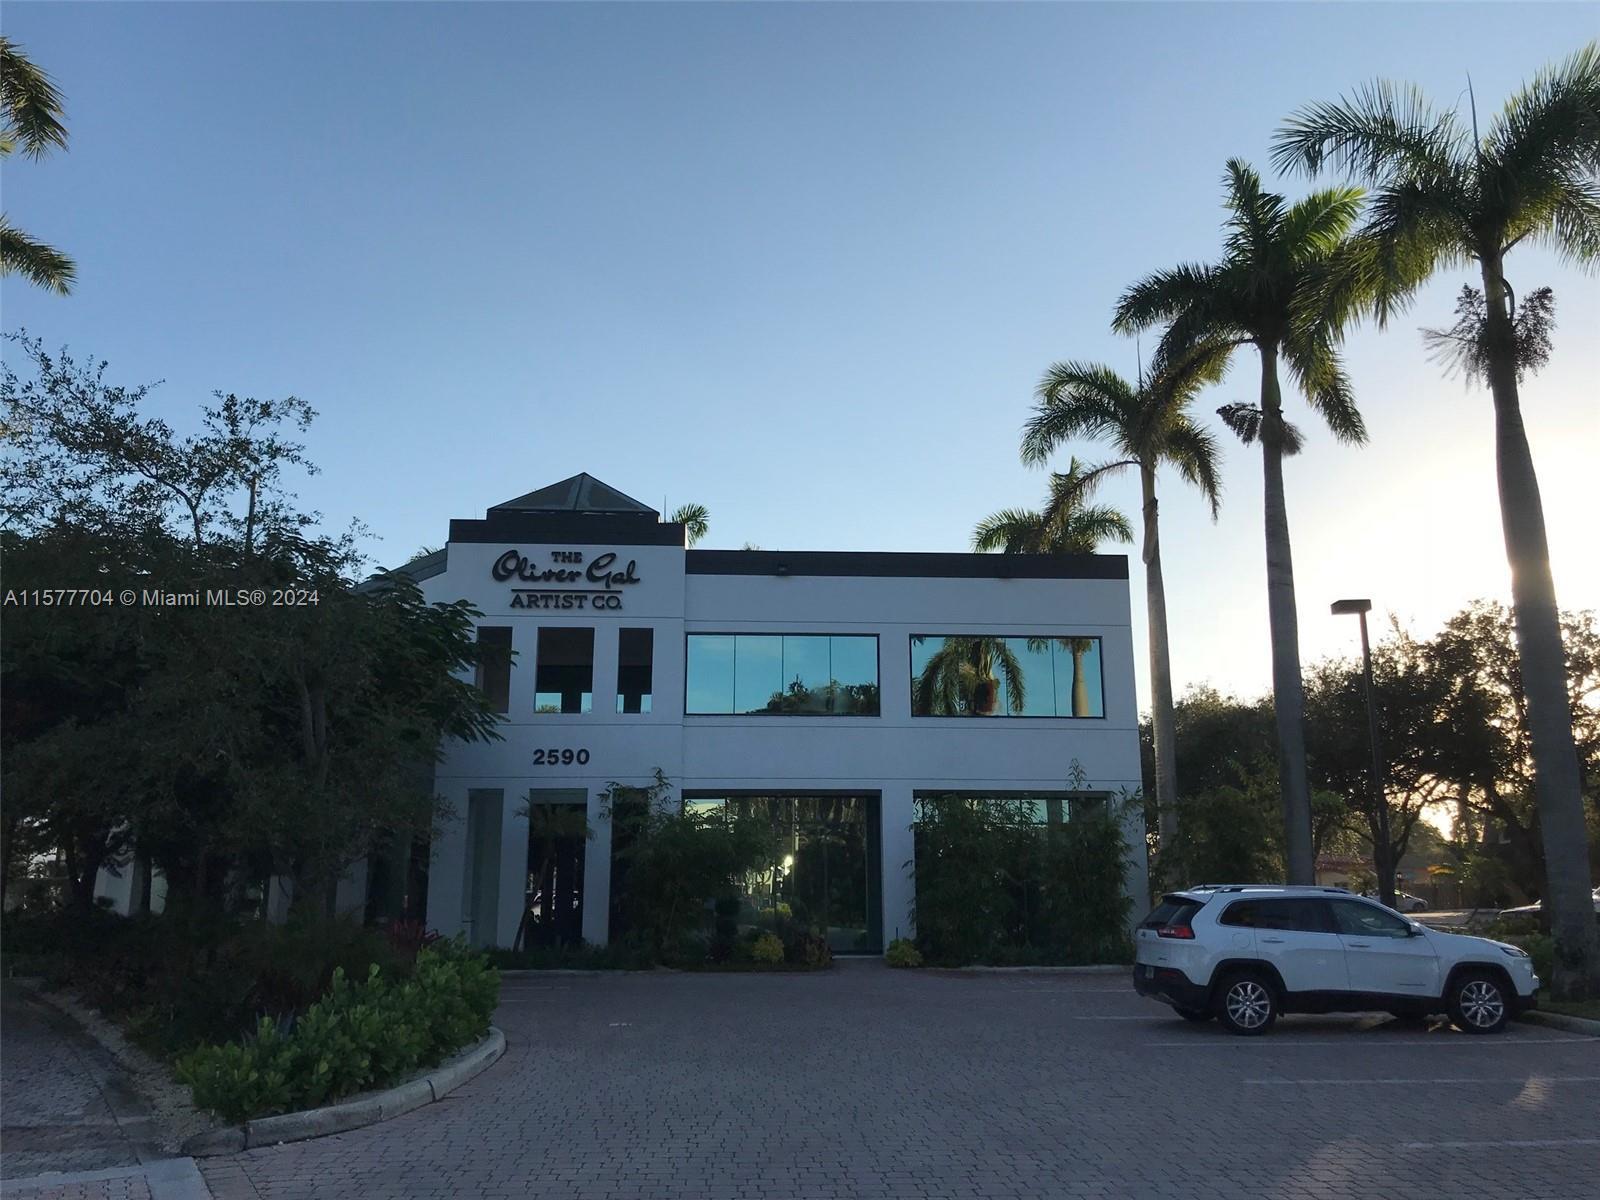 Photo of 2590 Hollywood Blvd in Hollywood, FL